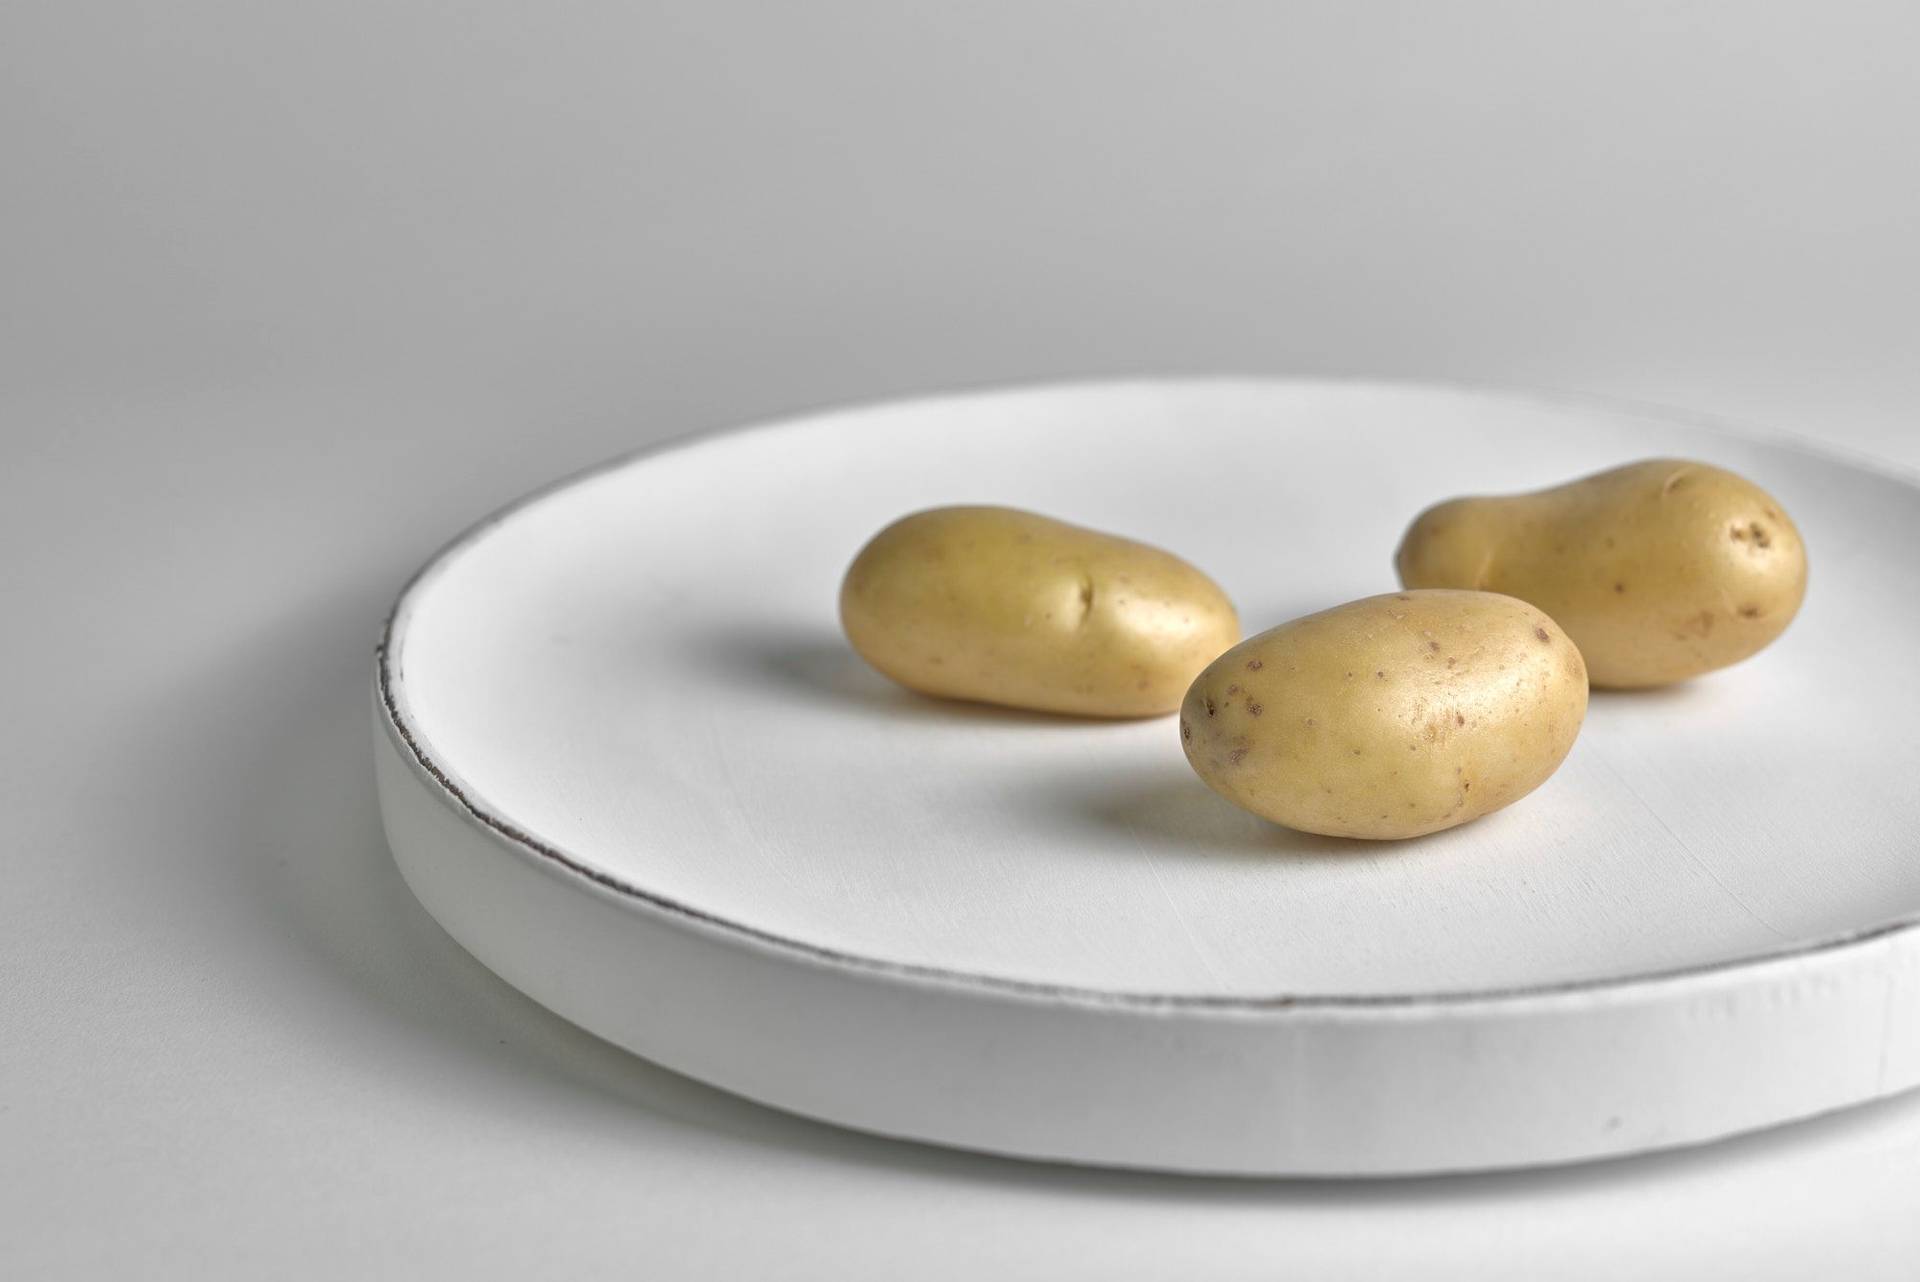 three potatoes on a white plate with white background